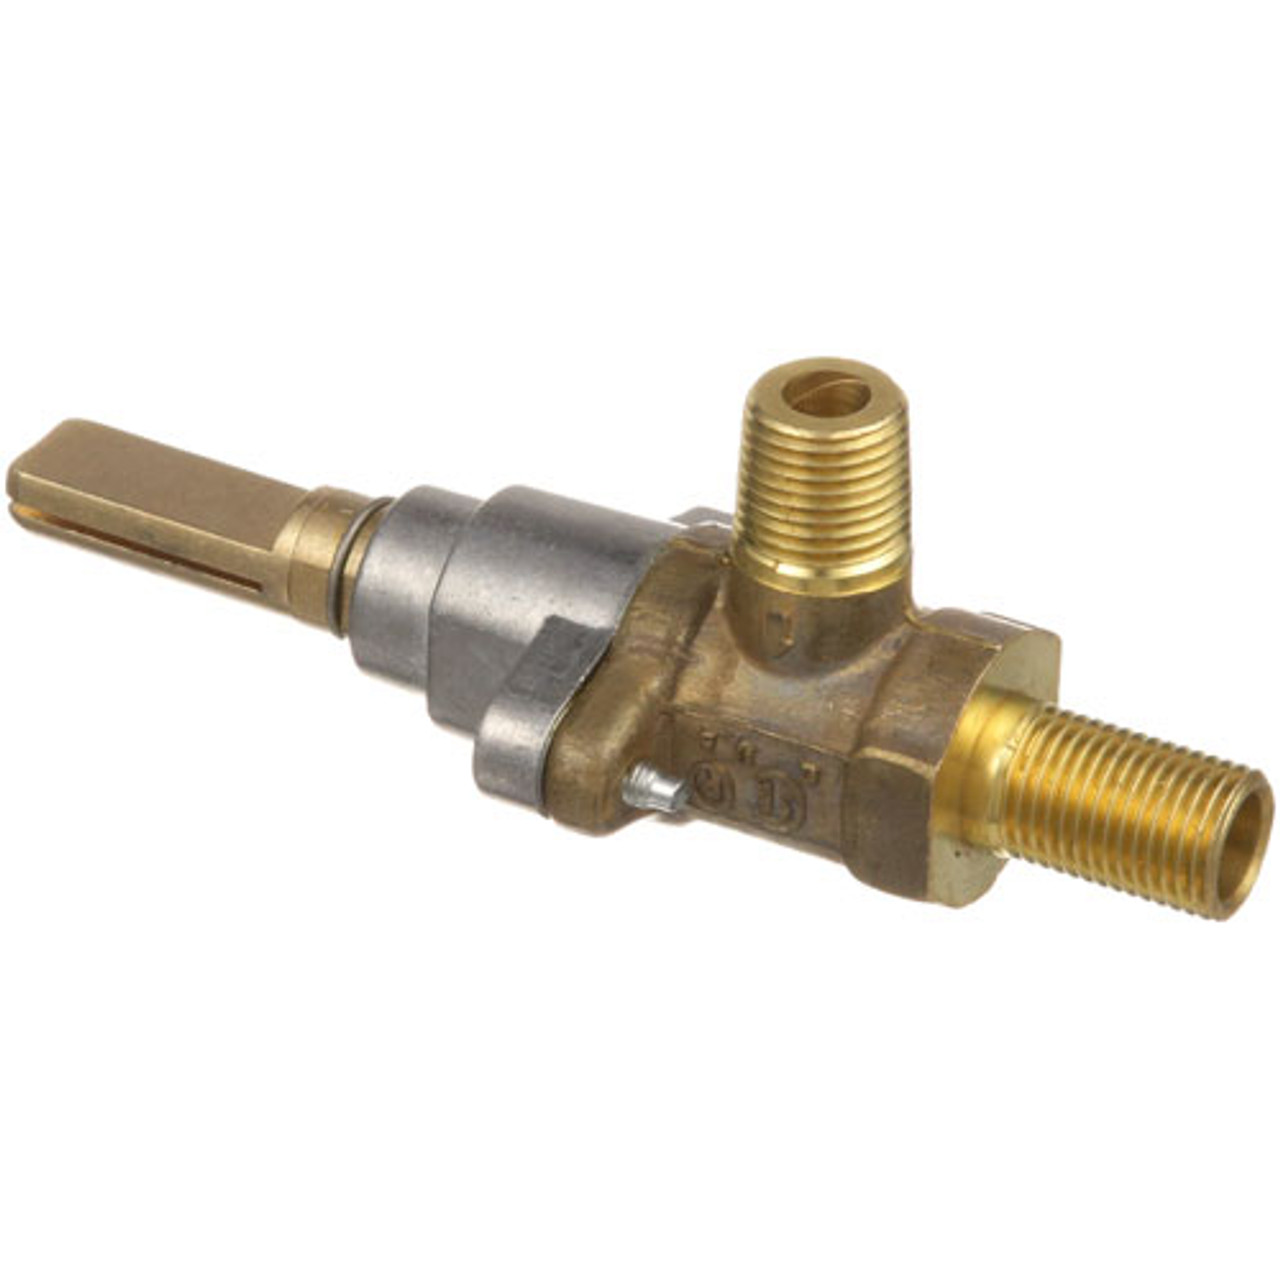 Burner Valve - Replacement Part For APW 2068500